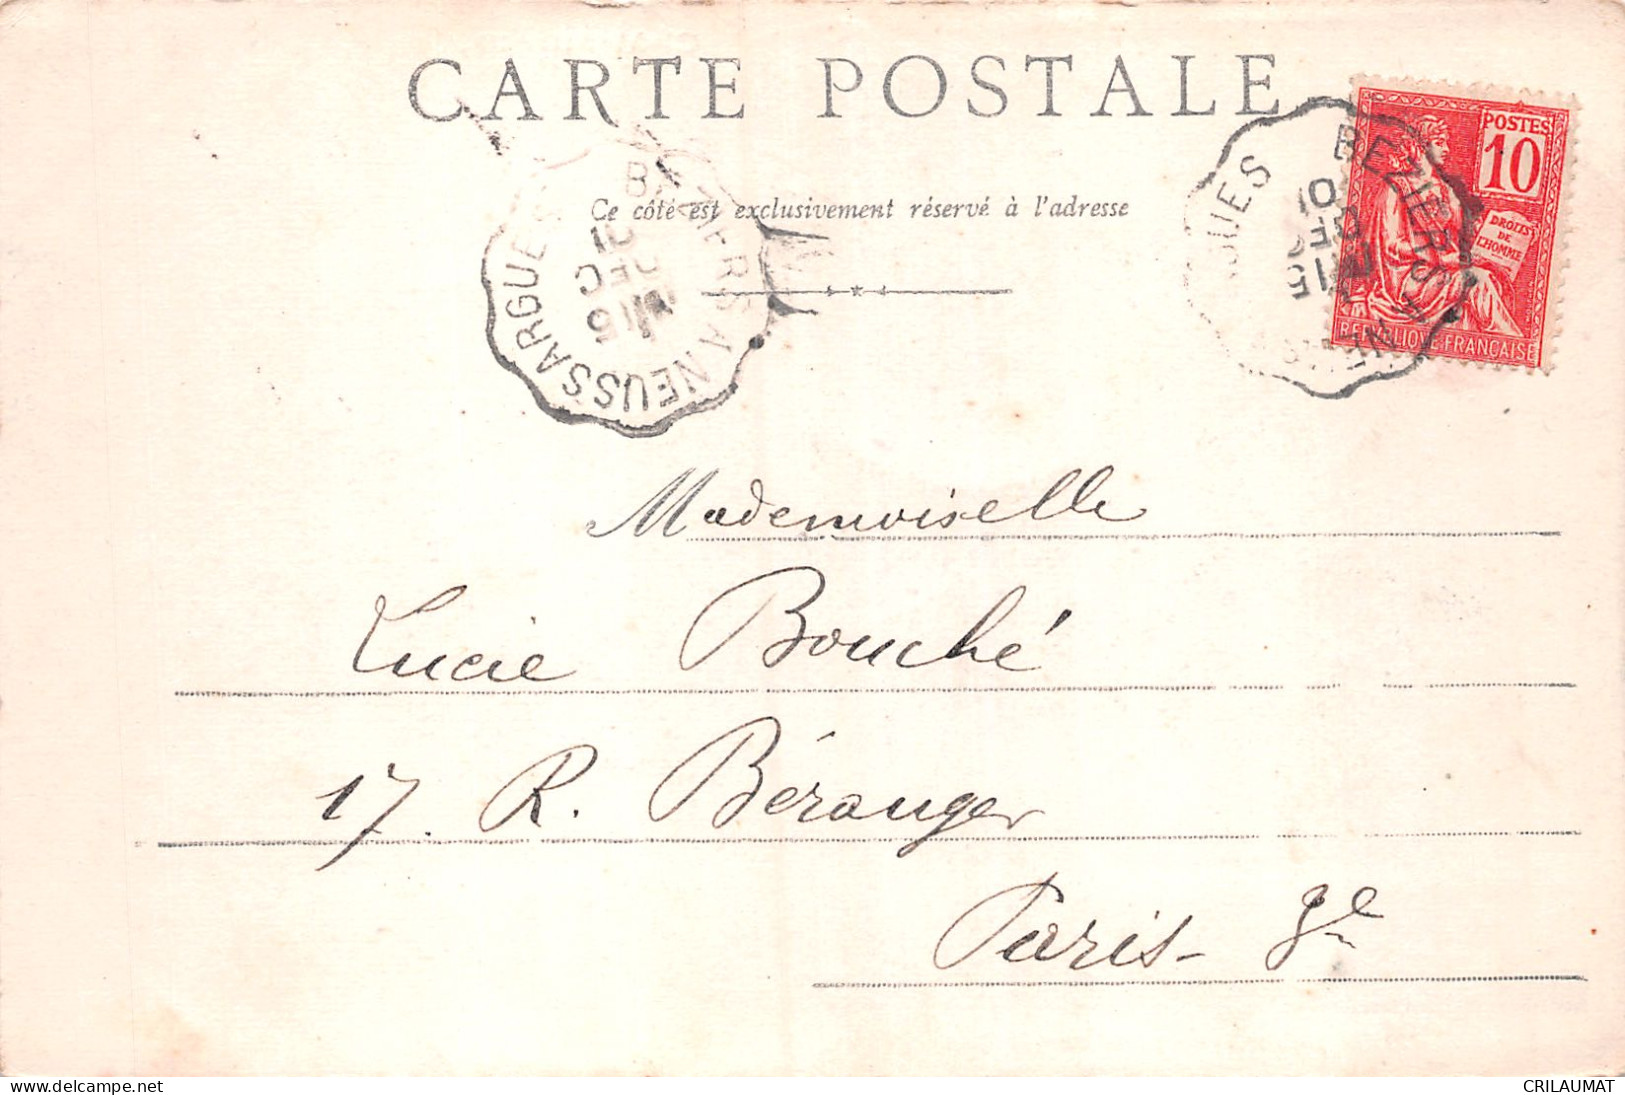 36-CHATEAUROUX-N°5137-E/0117 - Chateauroux